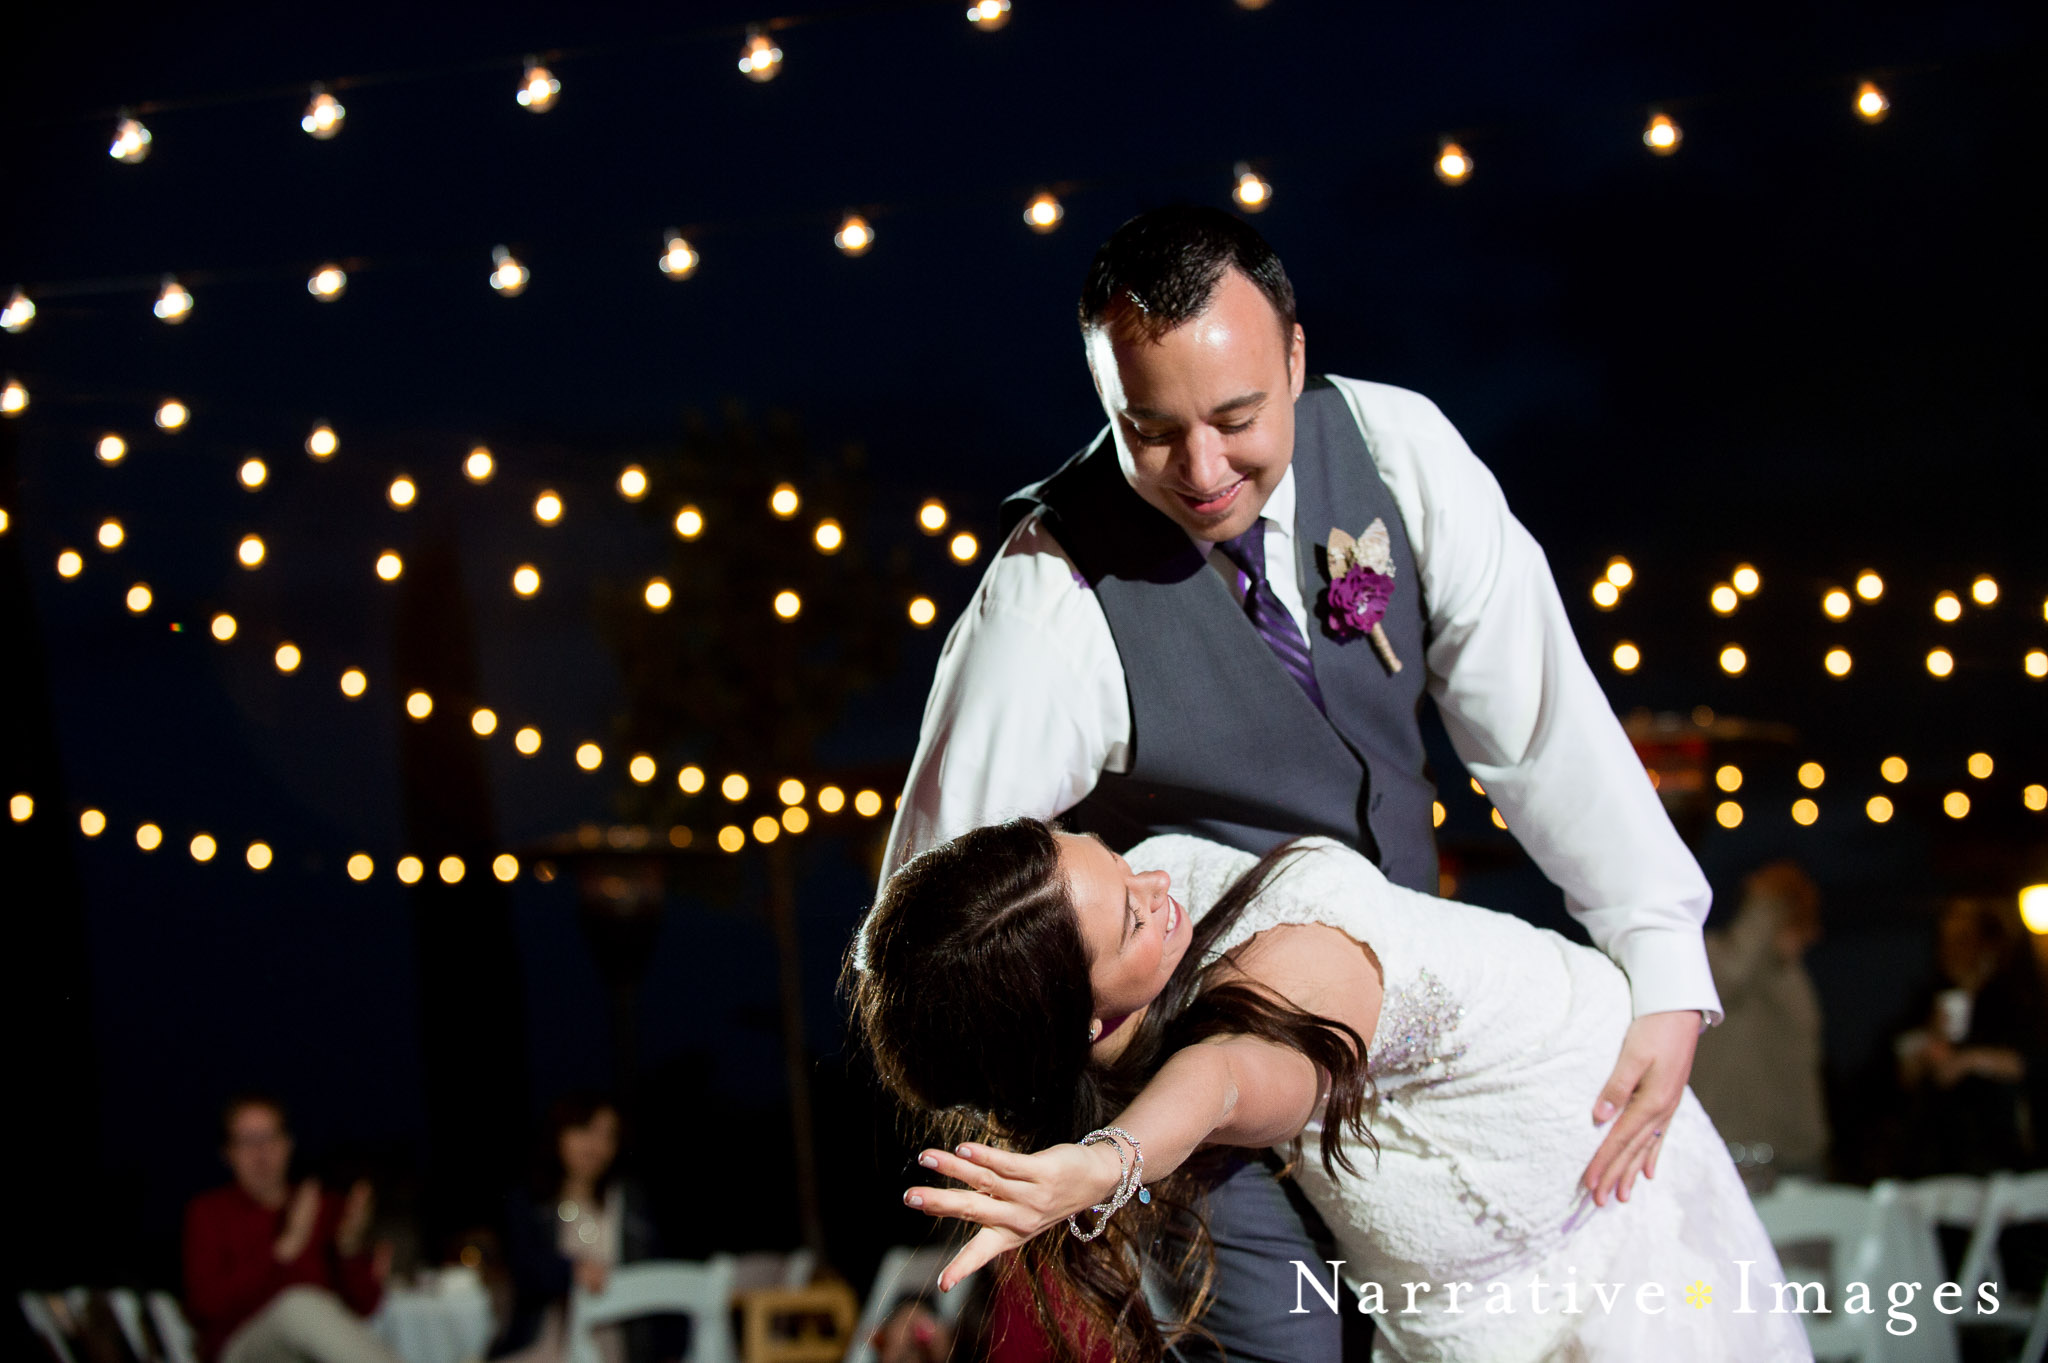 photojournalistic wedding photo of Groom dipping bride at end of first dance at mount Palomar winery wedding reception 